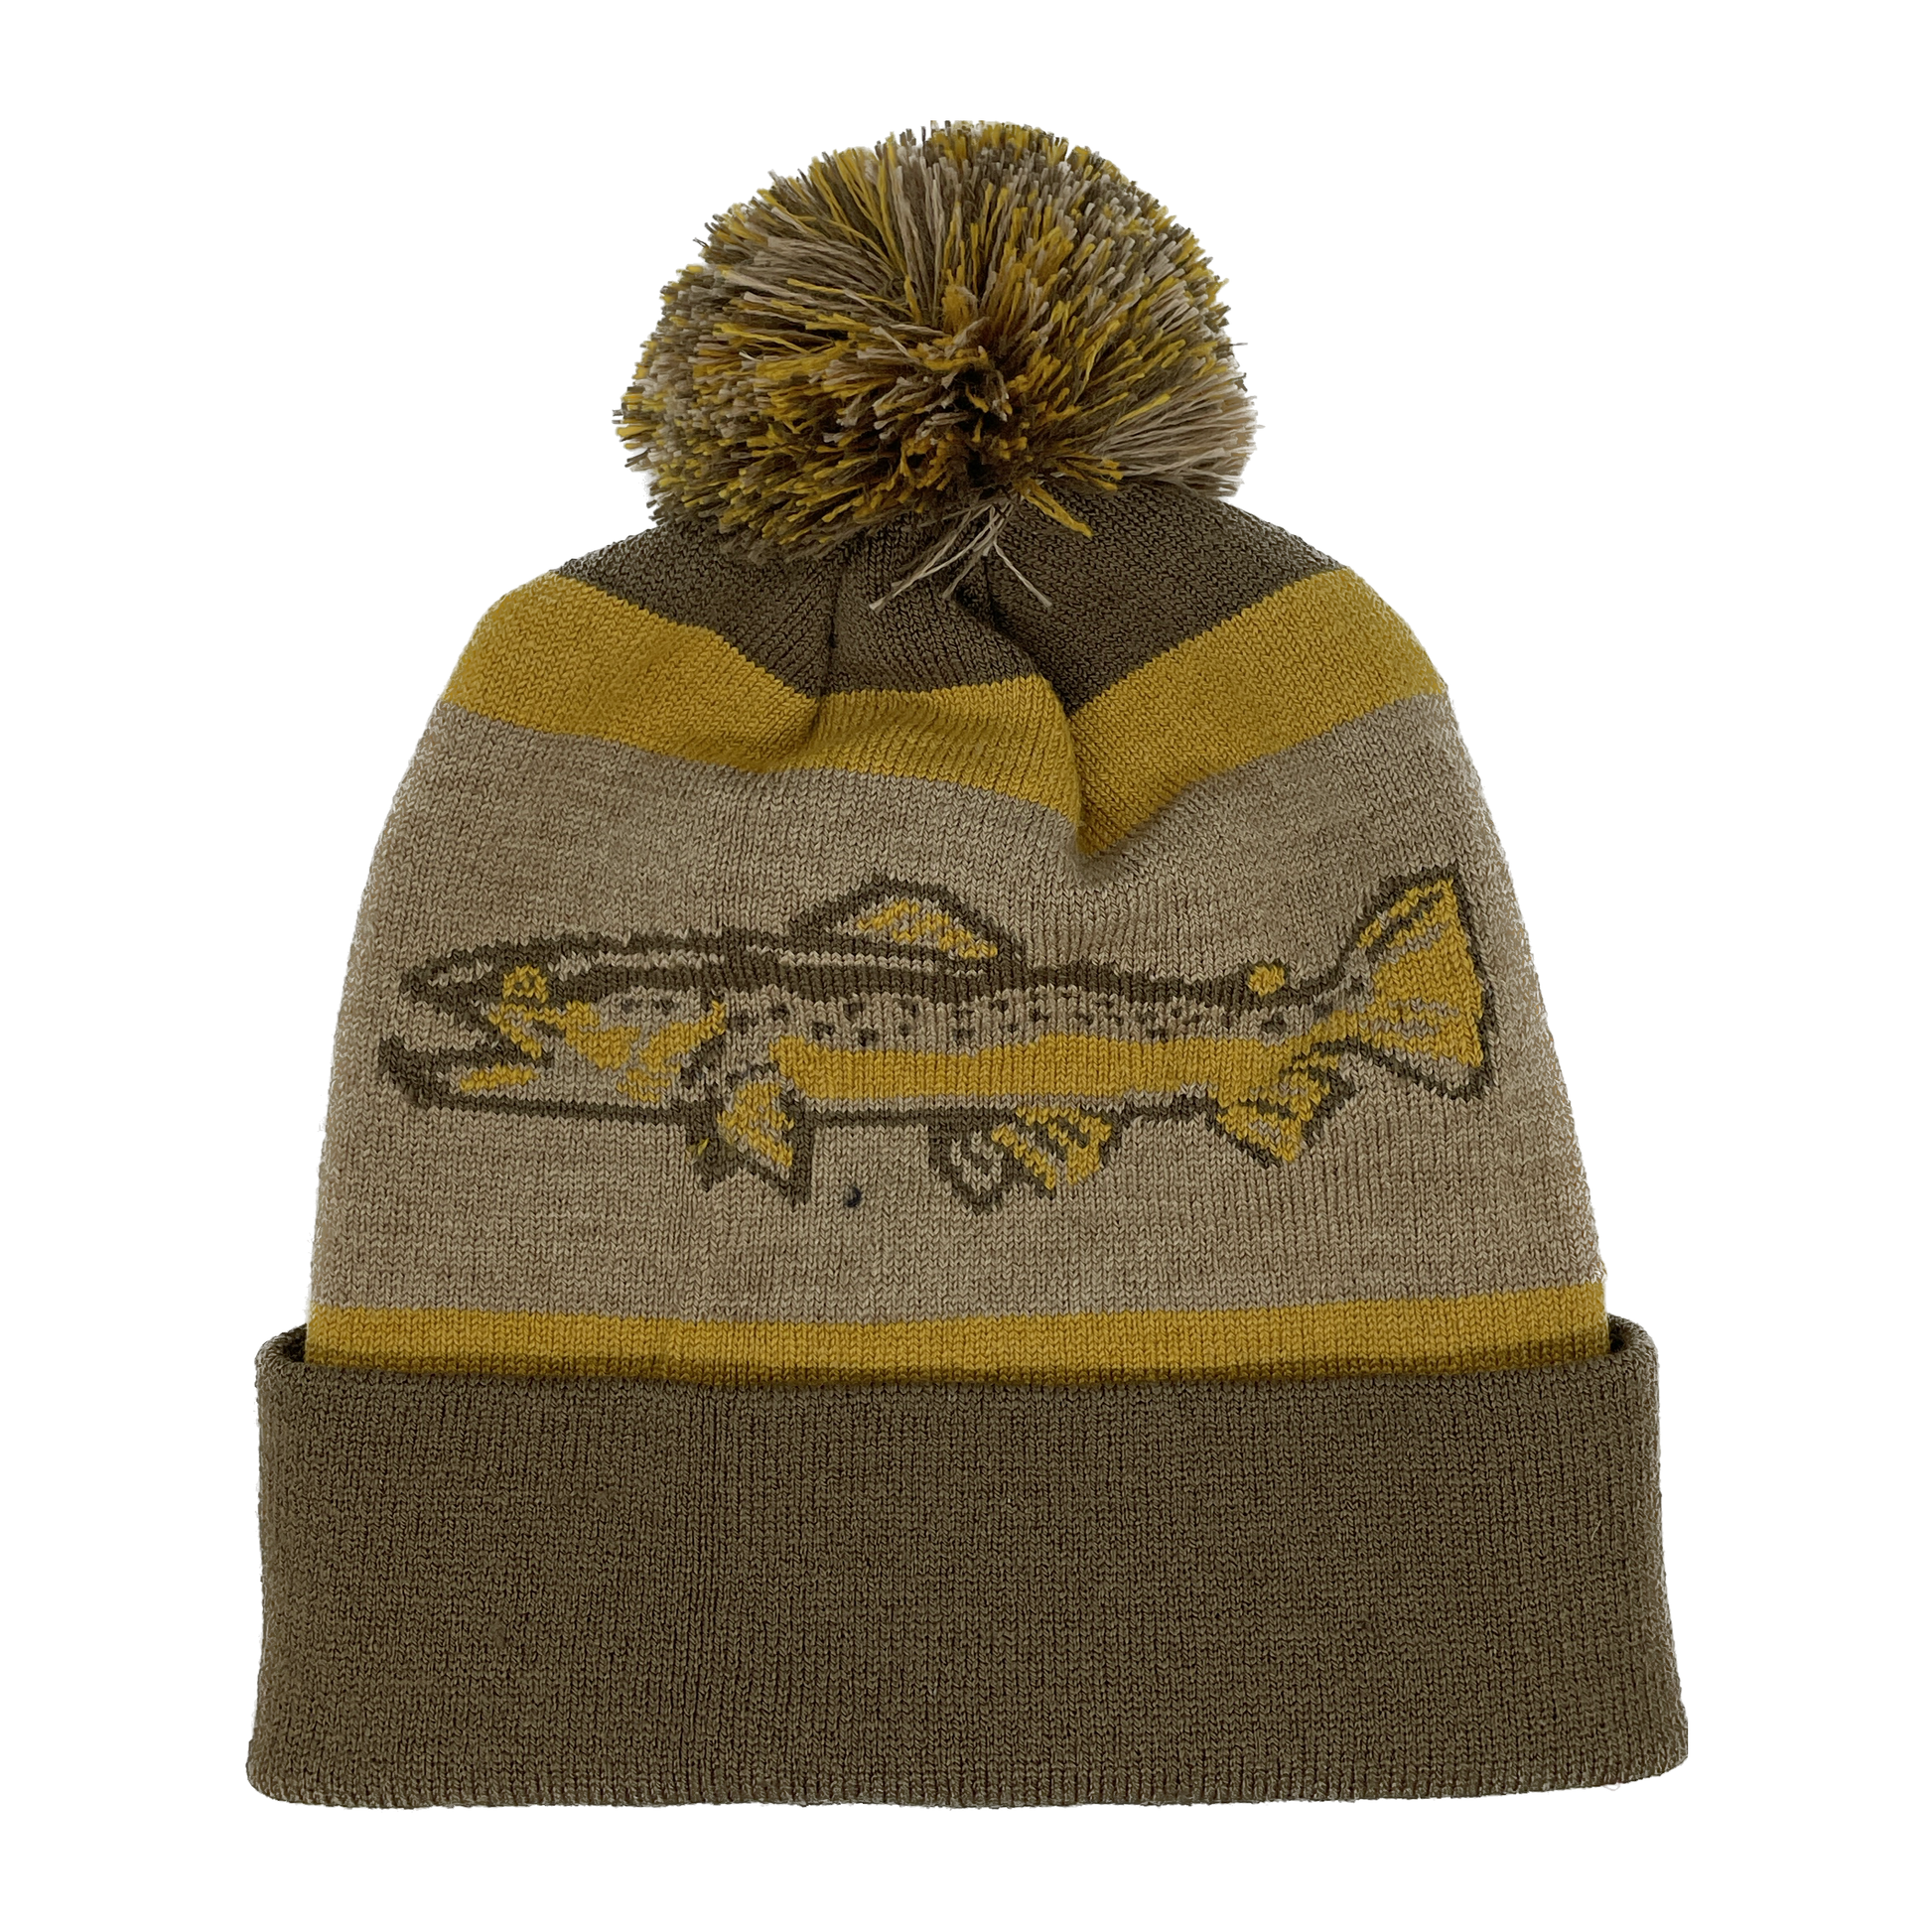 A winter hat with a brown cuff shows a brown trout on the main area with a multi colored poof on top